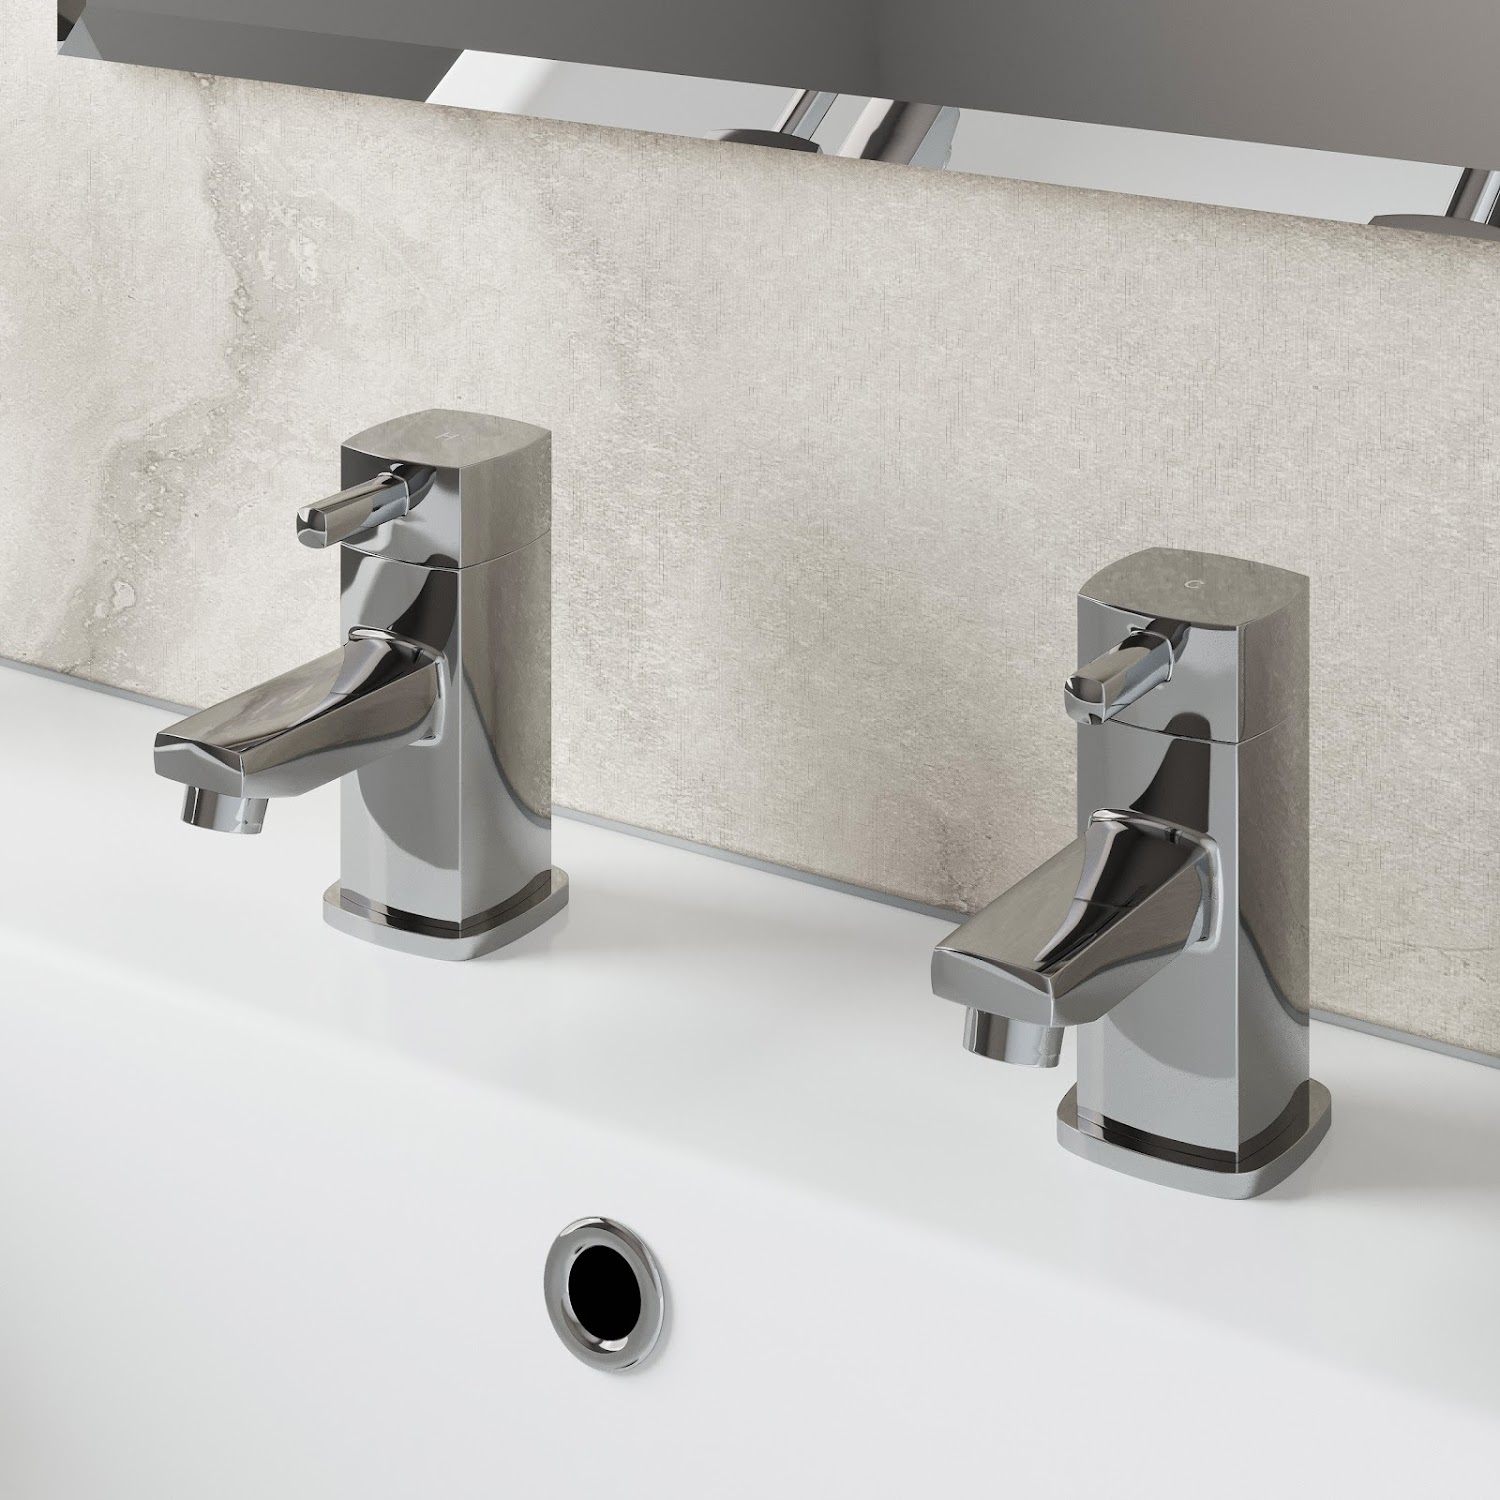 Modern Bathroom Hot Cold Basin Taps Twin Square Chrome Lever Handles Cloakroom 5056093611130 Ebay